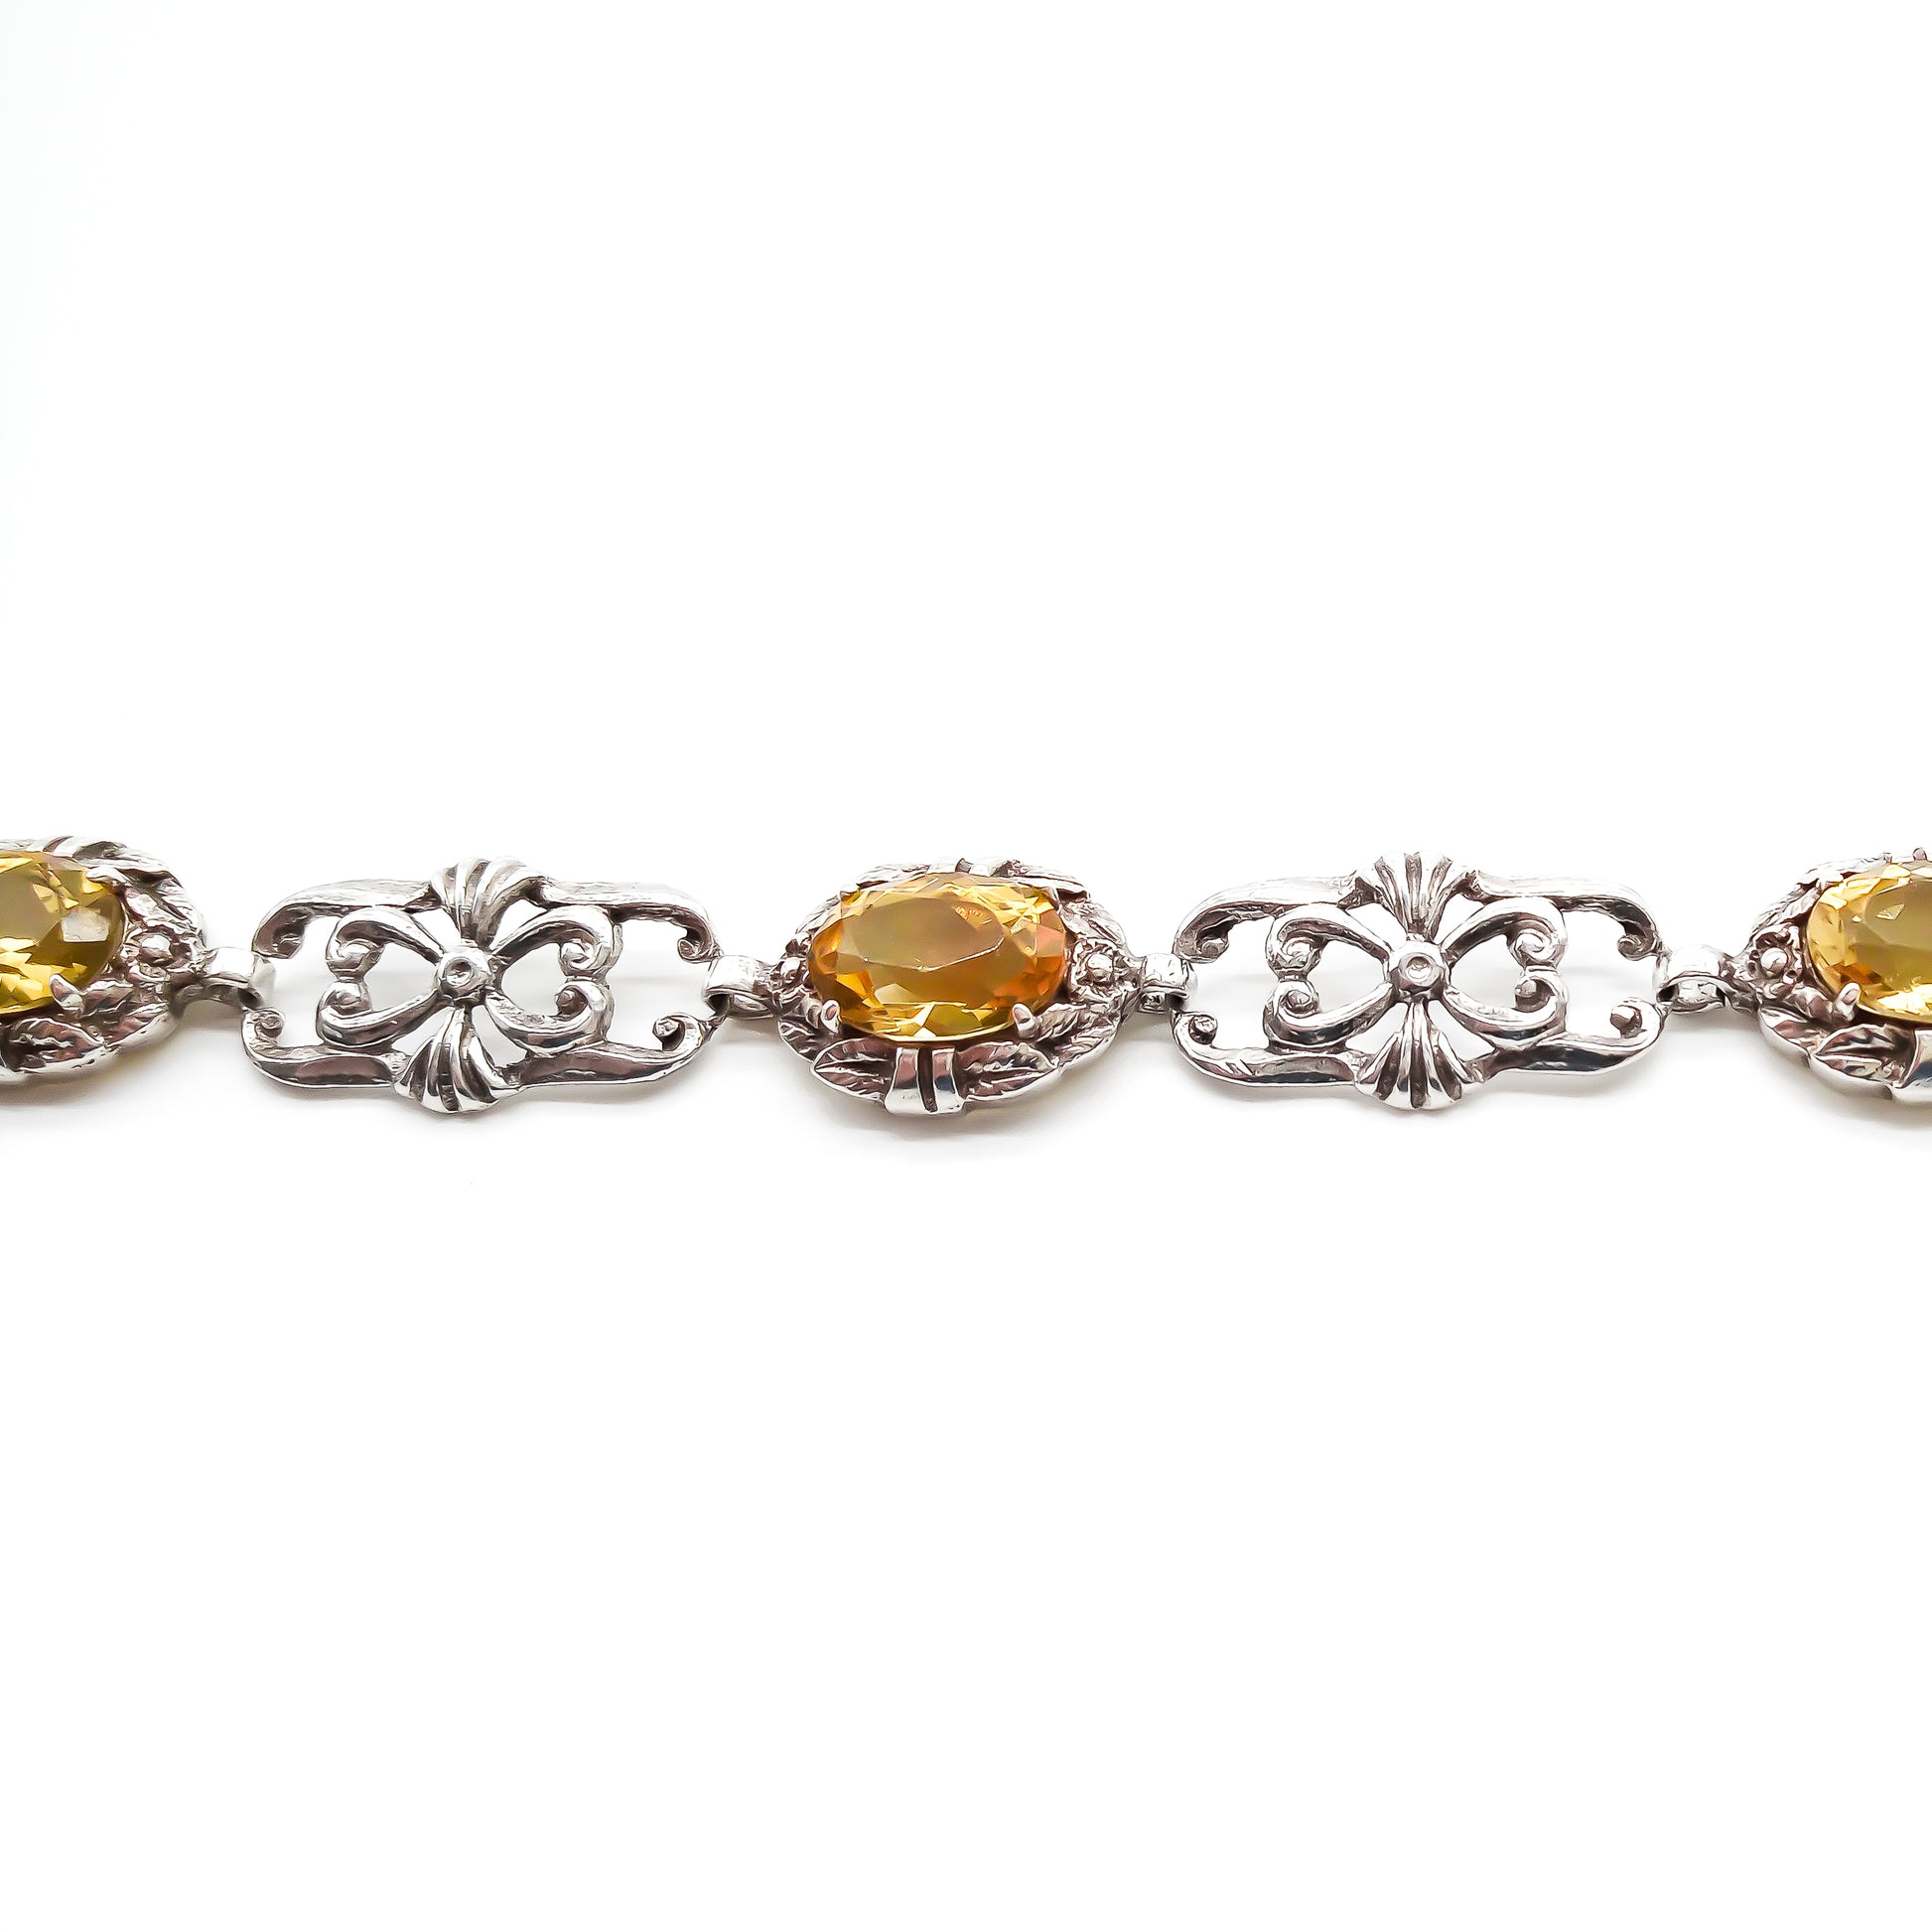 Stunning ornate sterling silver bracelet set with four beautifully faceted oval citrines.